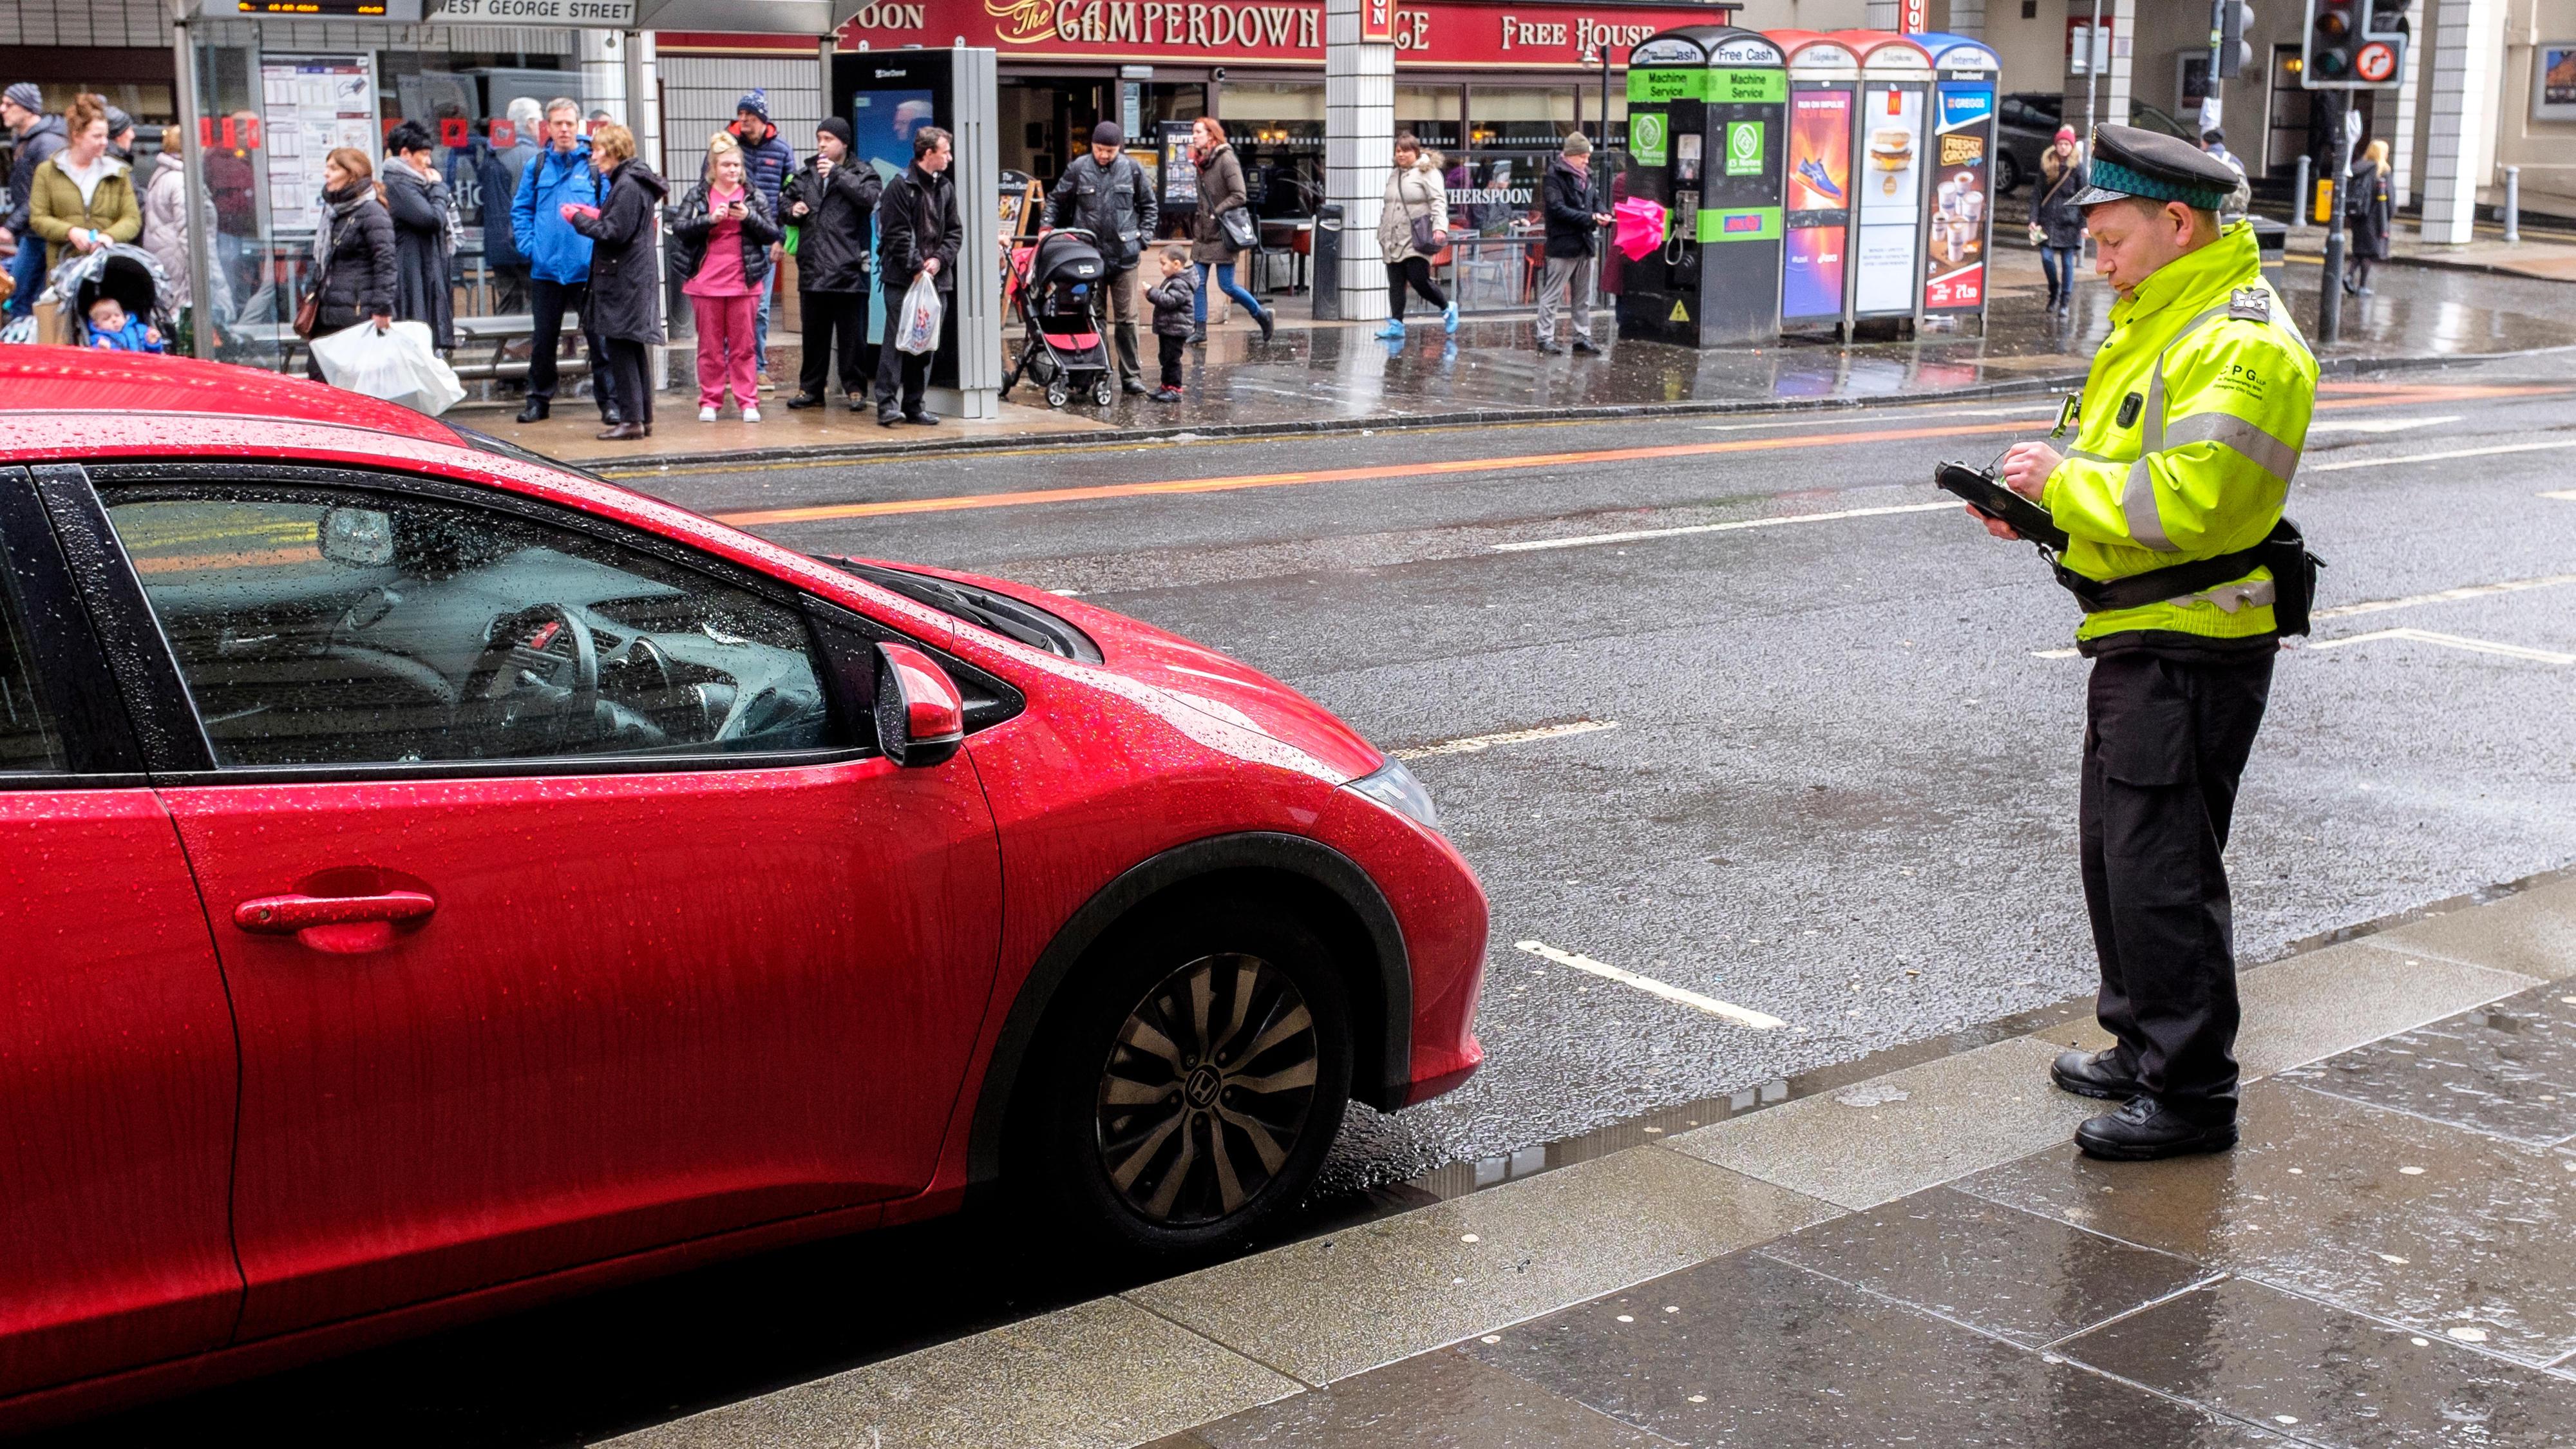 Glasgow city council had intended to extend parking charges in central areas from 6pm to 10pm seven days a week